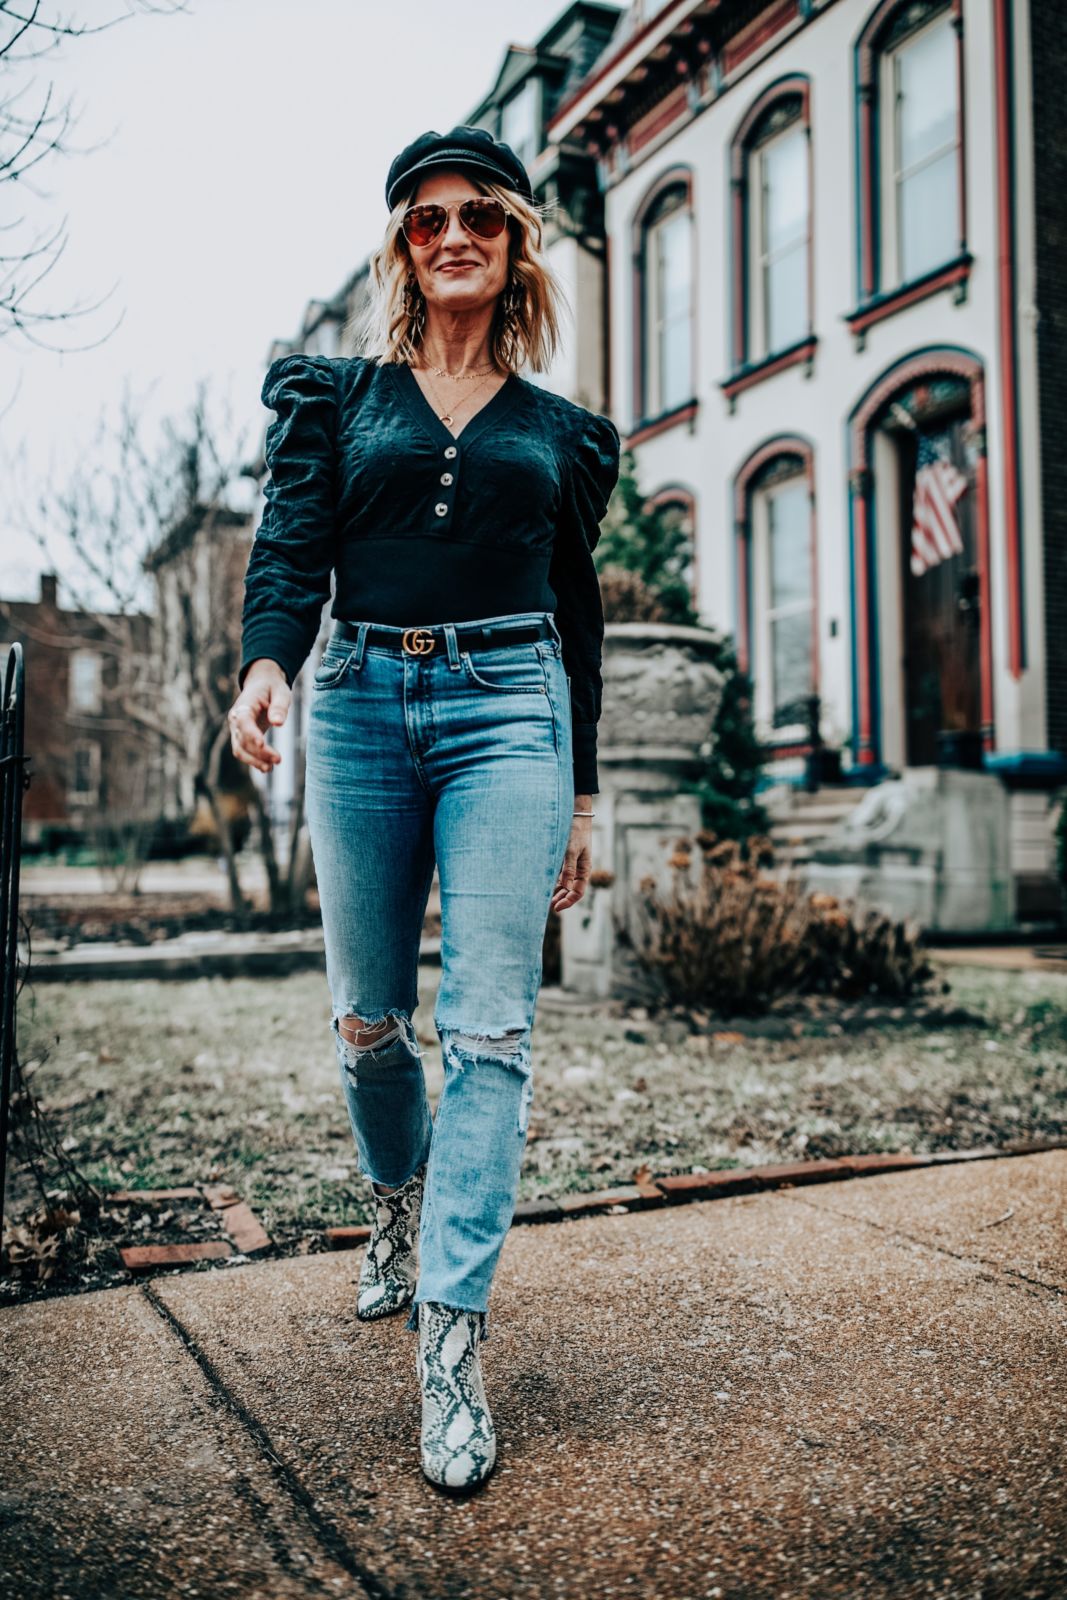 2019 fashion trends: puffy sleeves & snake print boots | oh darling blog